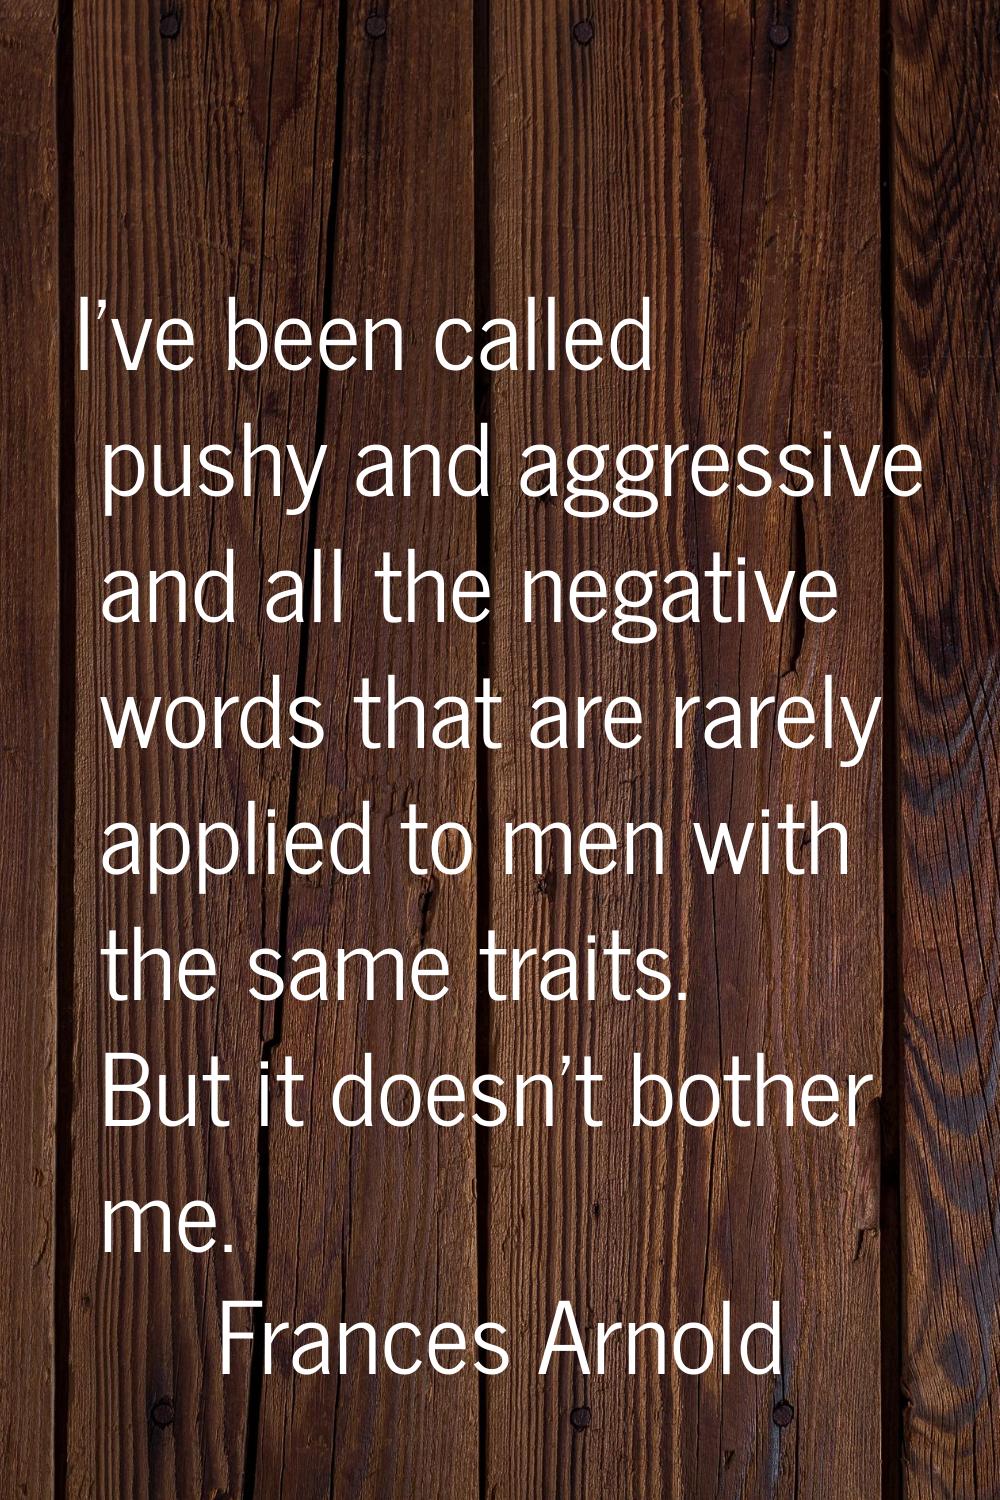 I've been called pushy and aggressive and all the negative words that are rarely applied to men wit